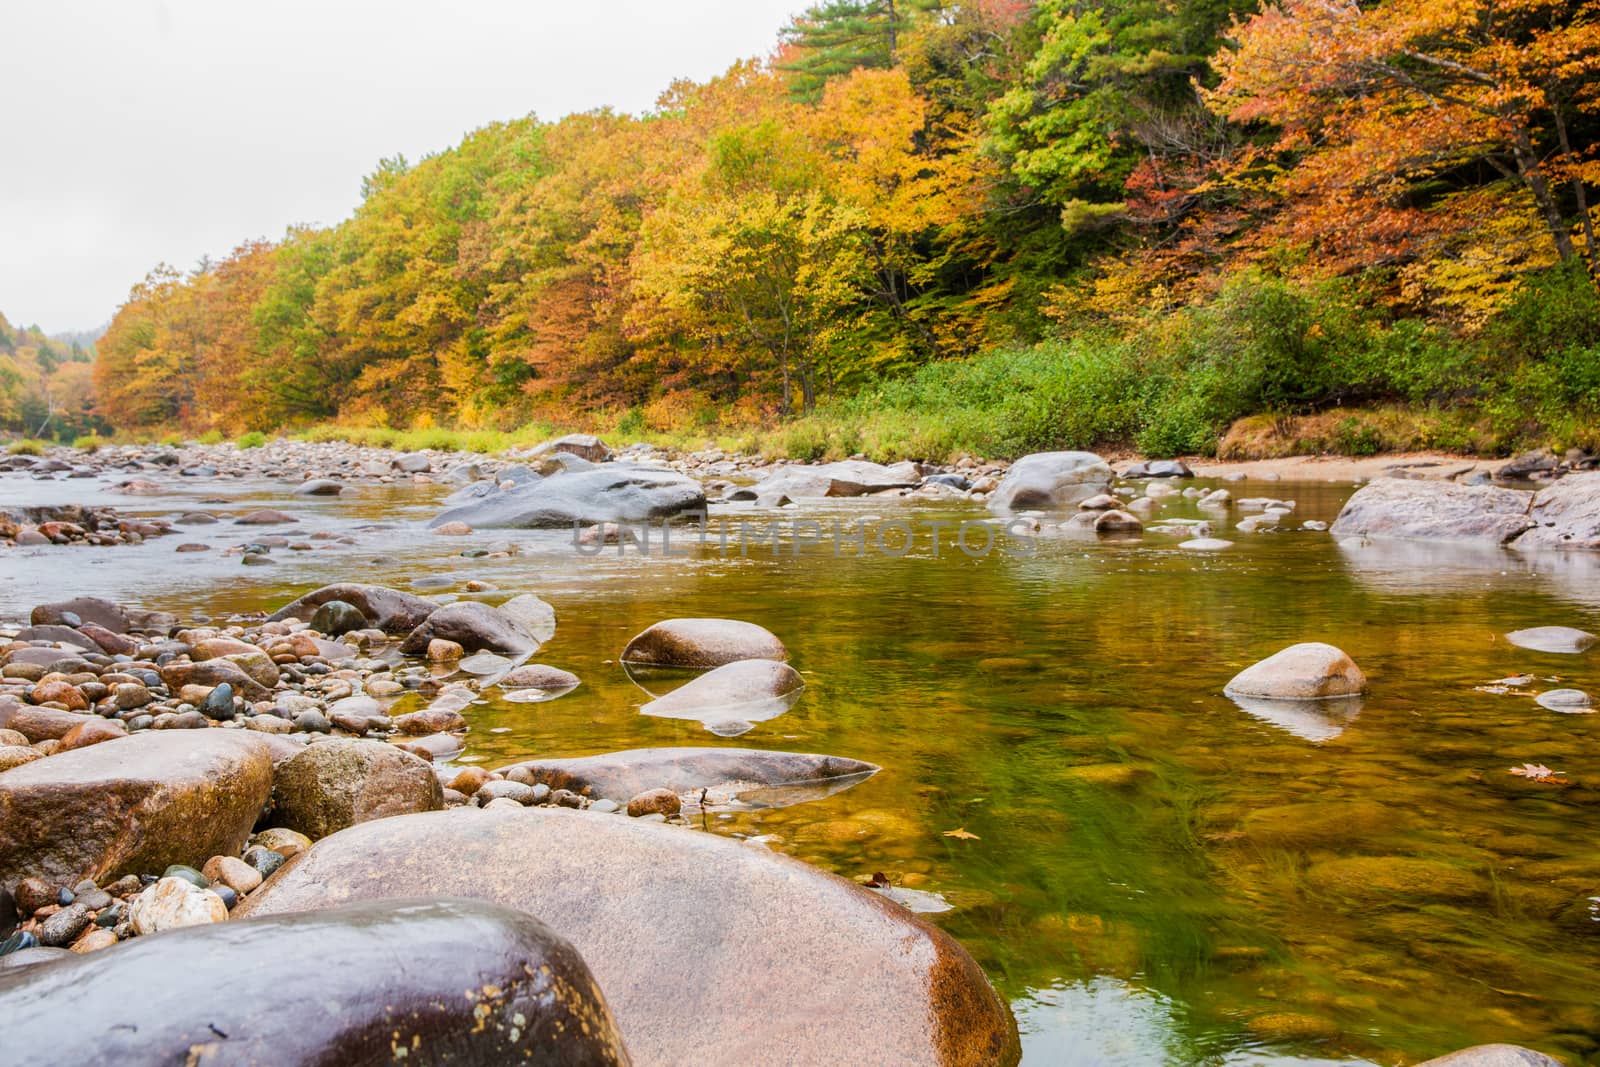 Bolders in shallow river in New England White Mountains National Park against background of colorful  forest in fall